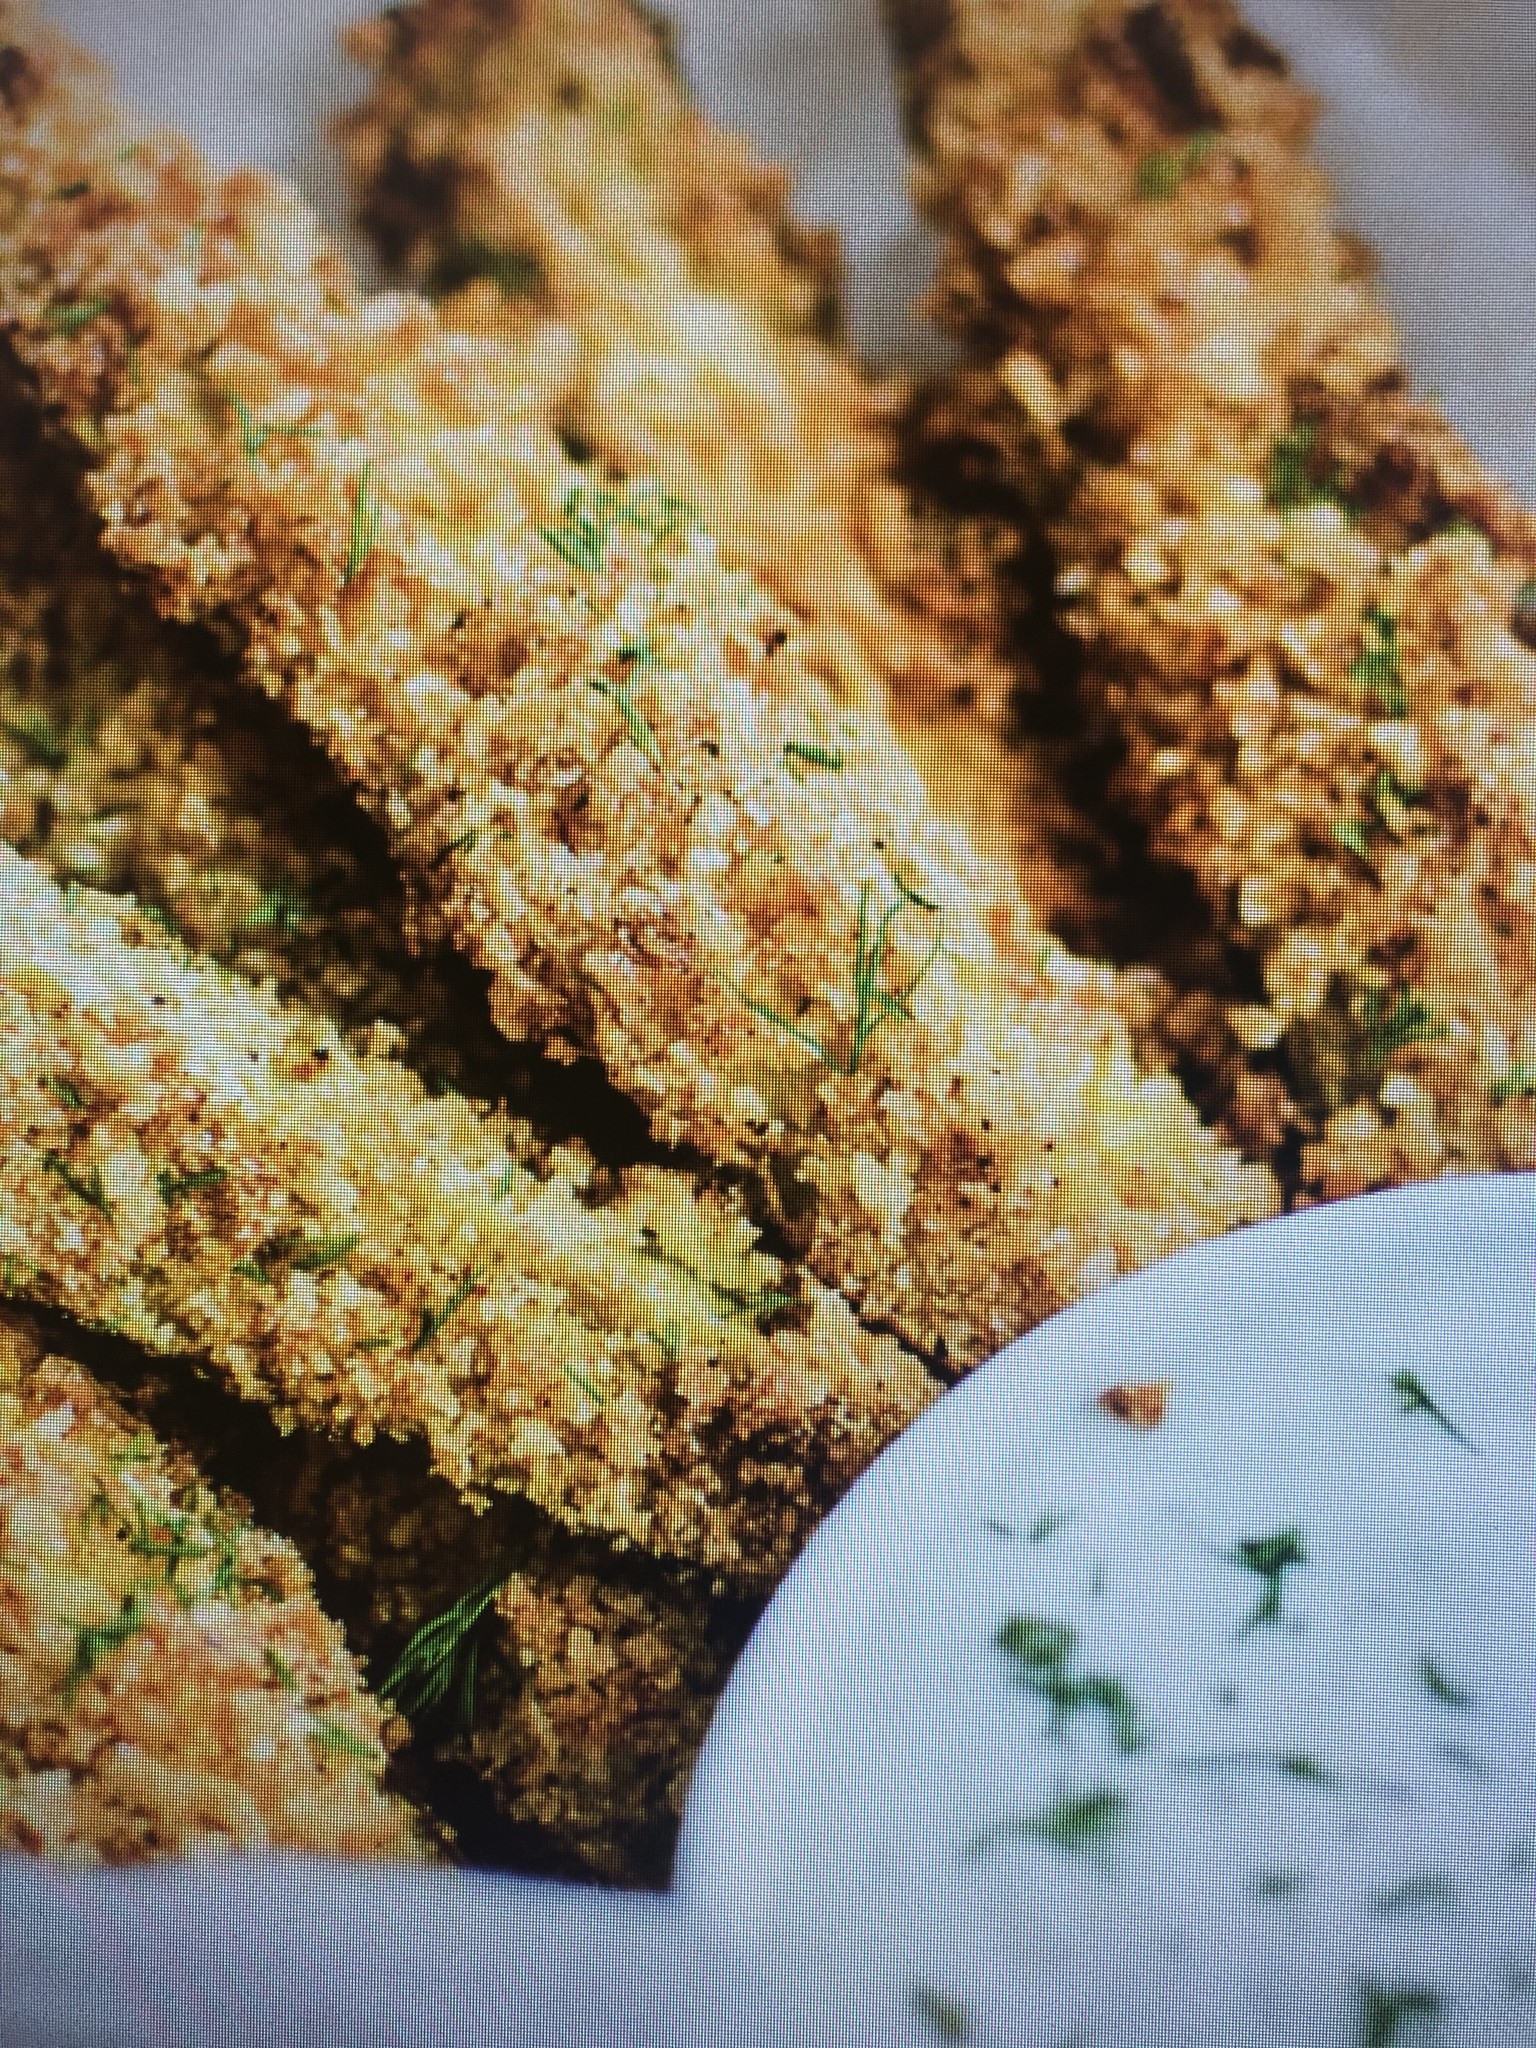 Amazing Oven-Fried Pickles with Dill-Buttermilk-Ranch Dipping Sauce